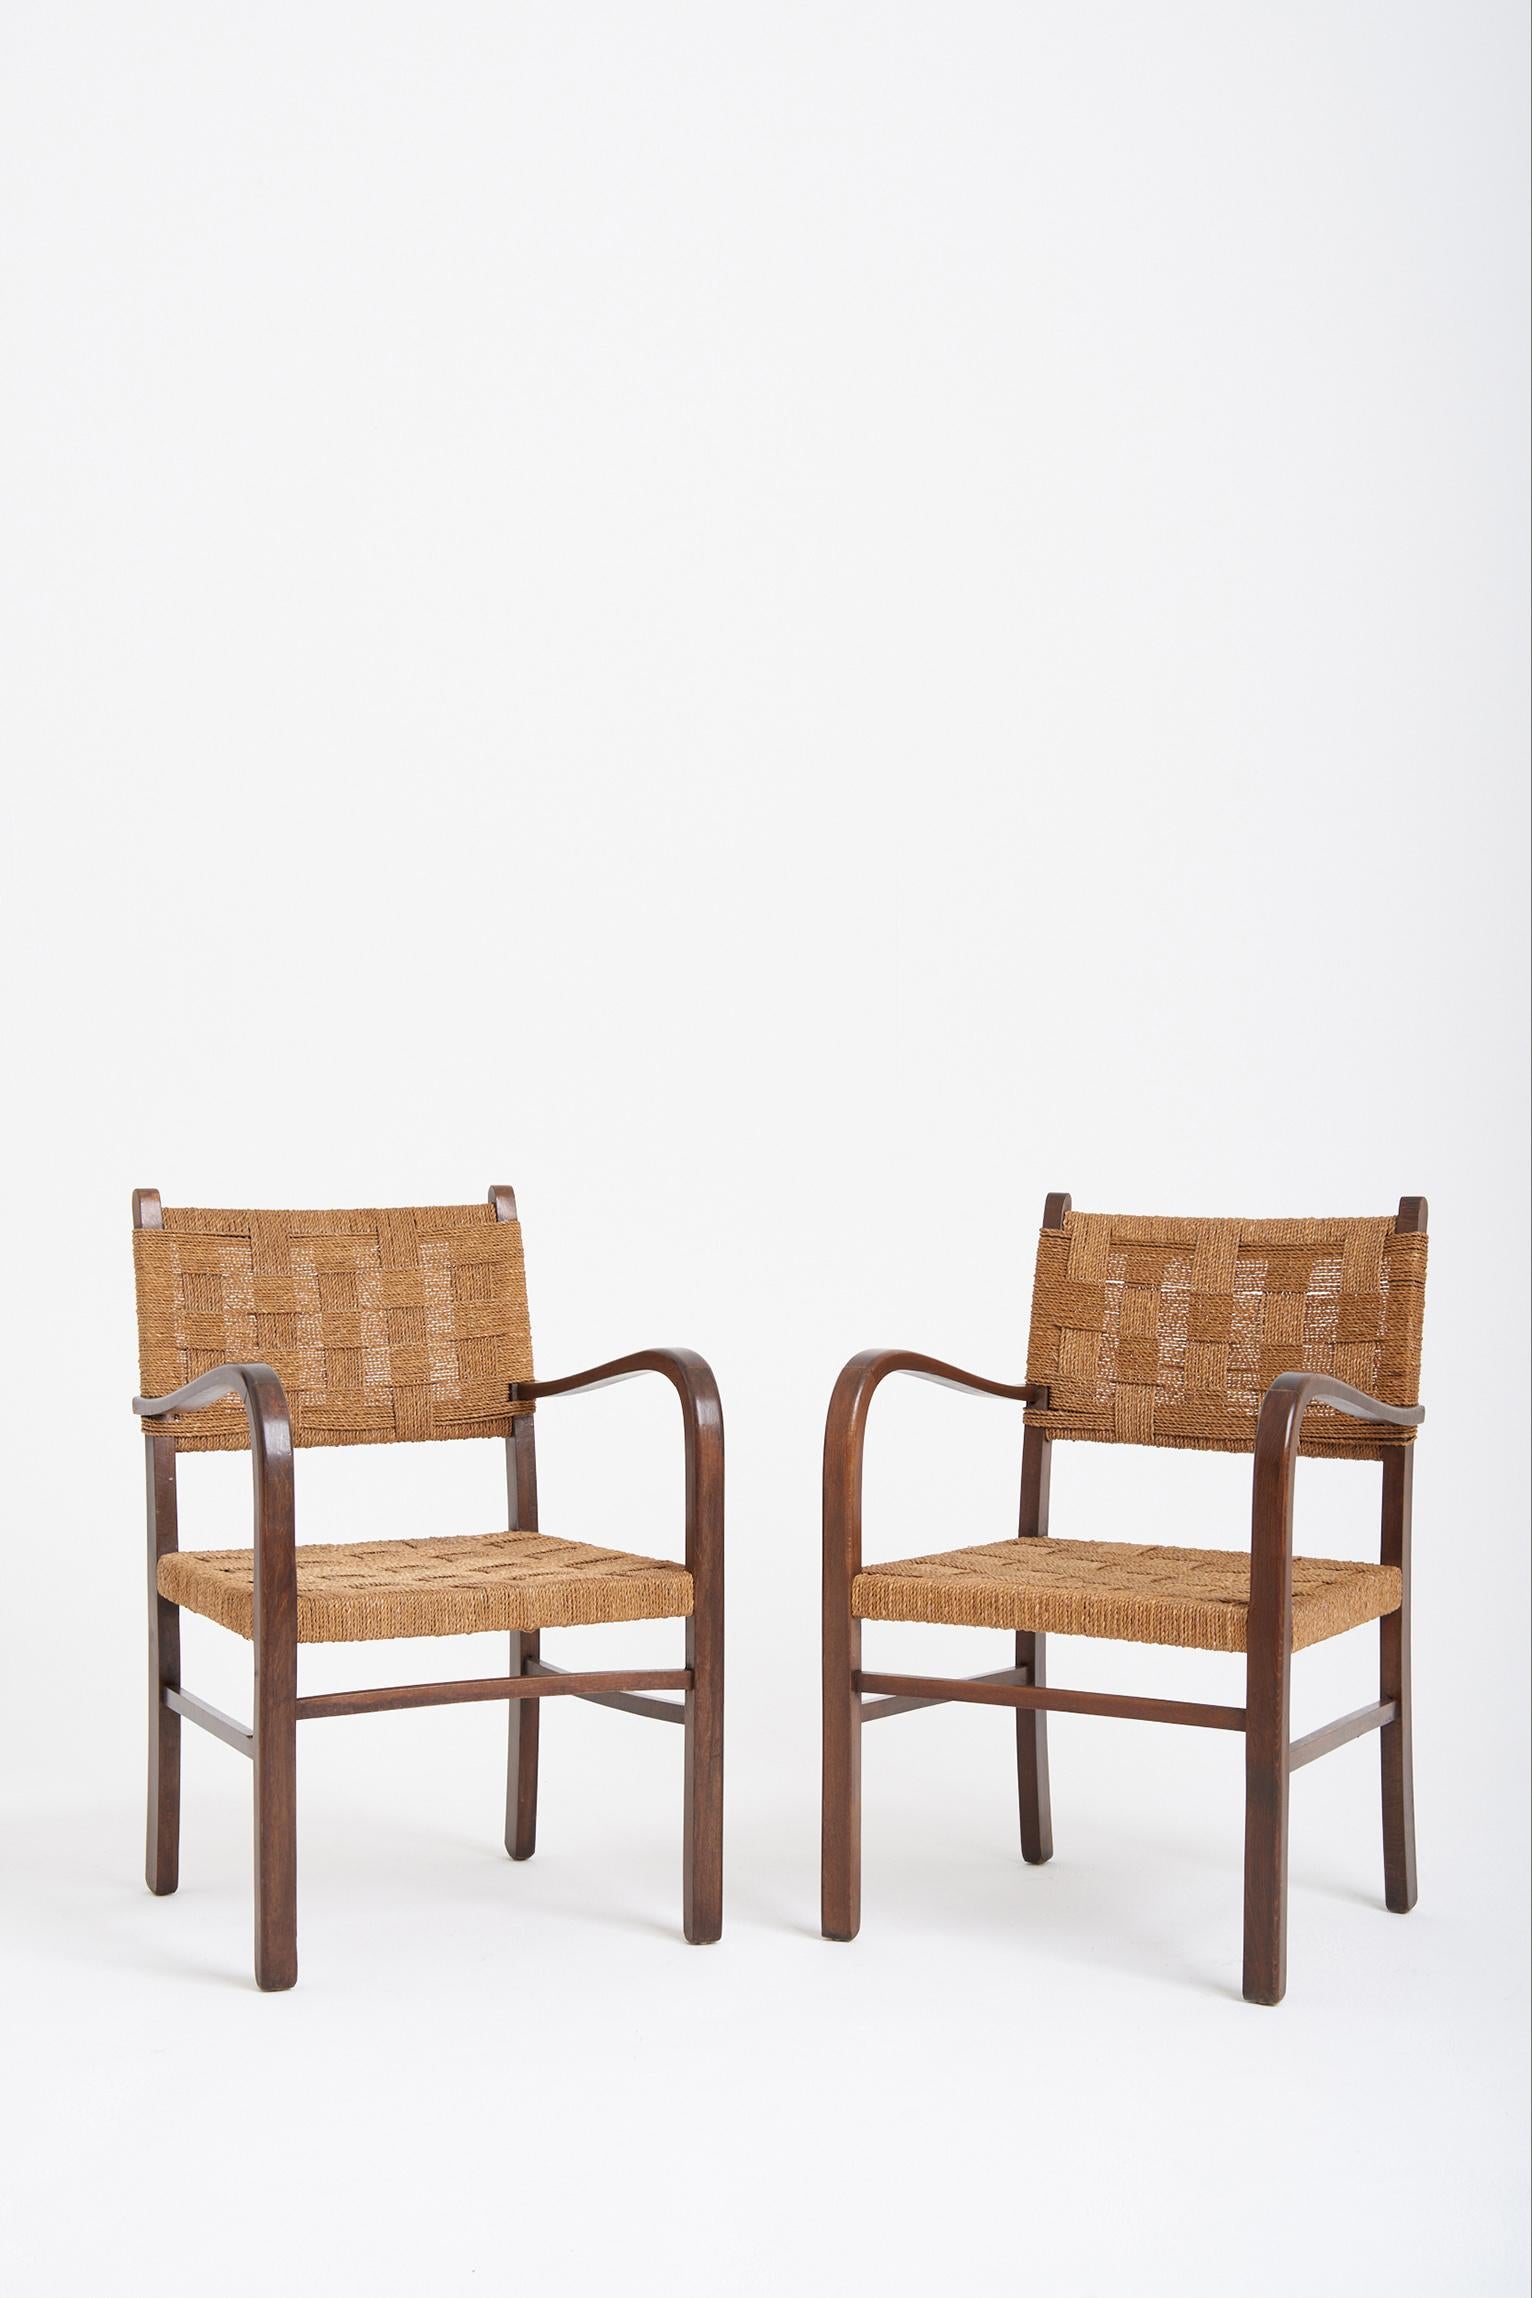 A pair of Bahaus beech wood and woven seagrass rope armchairs, by Erich Dieckmann (1896-1944),
circa 1925-1930.
 
Erich Dieckmann was one of the most important Bauhaus furniture designers. From 1918 until 1920 Erich Dieckmann studied architecture